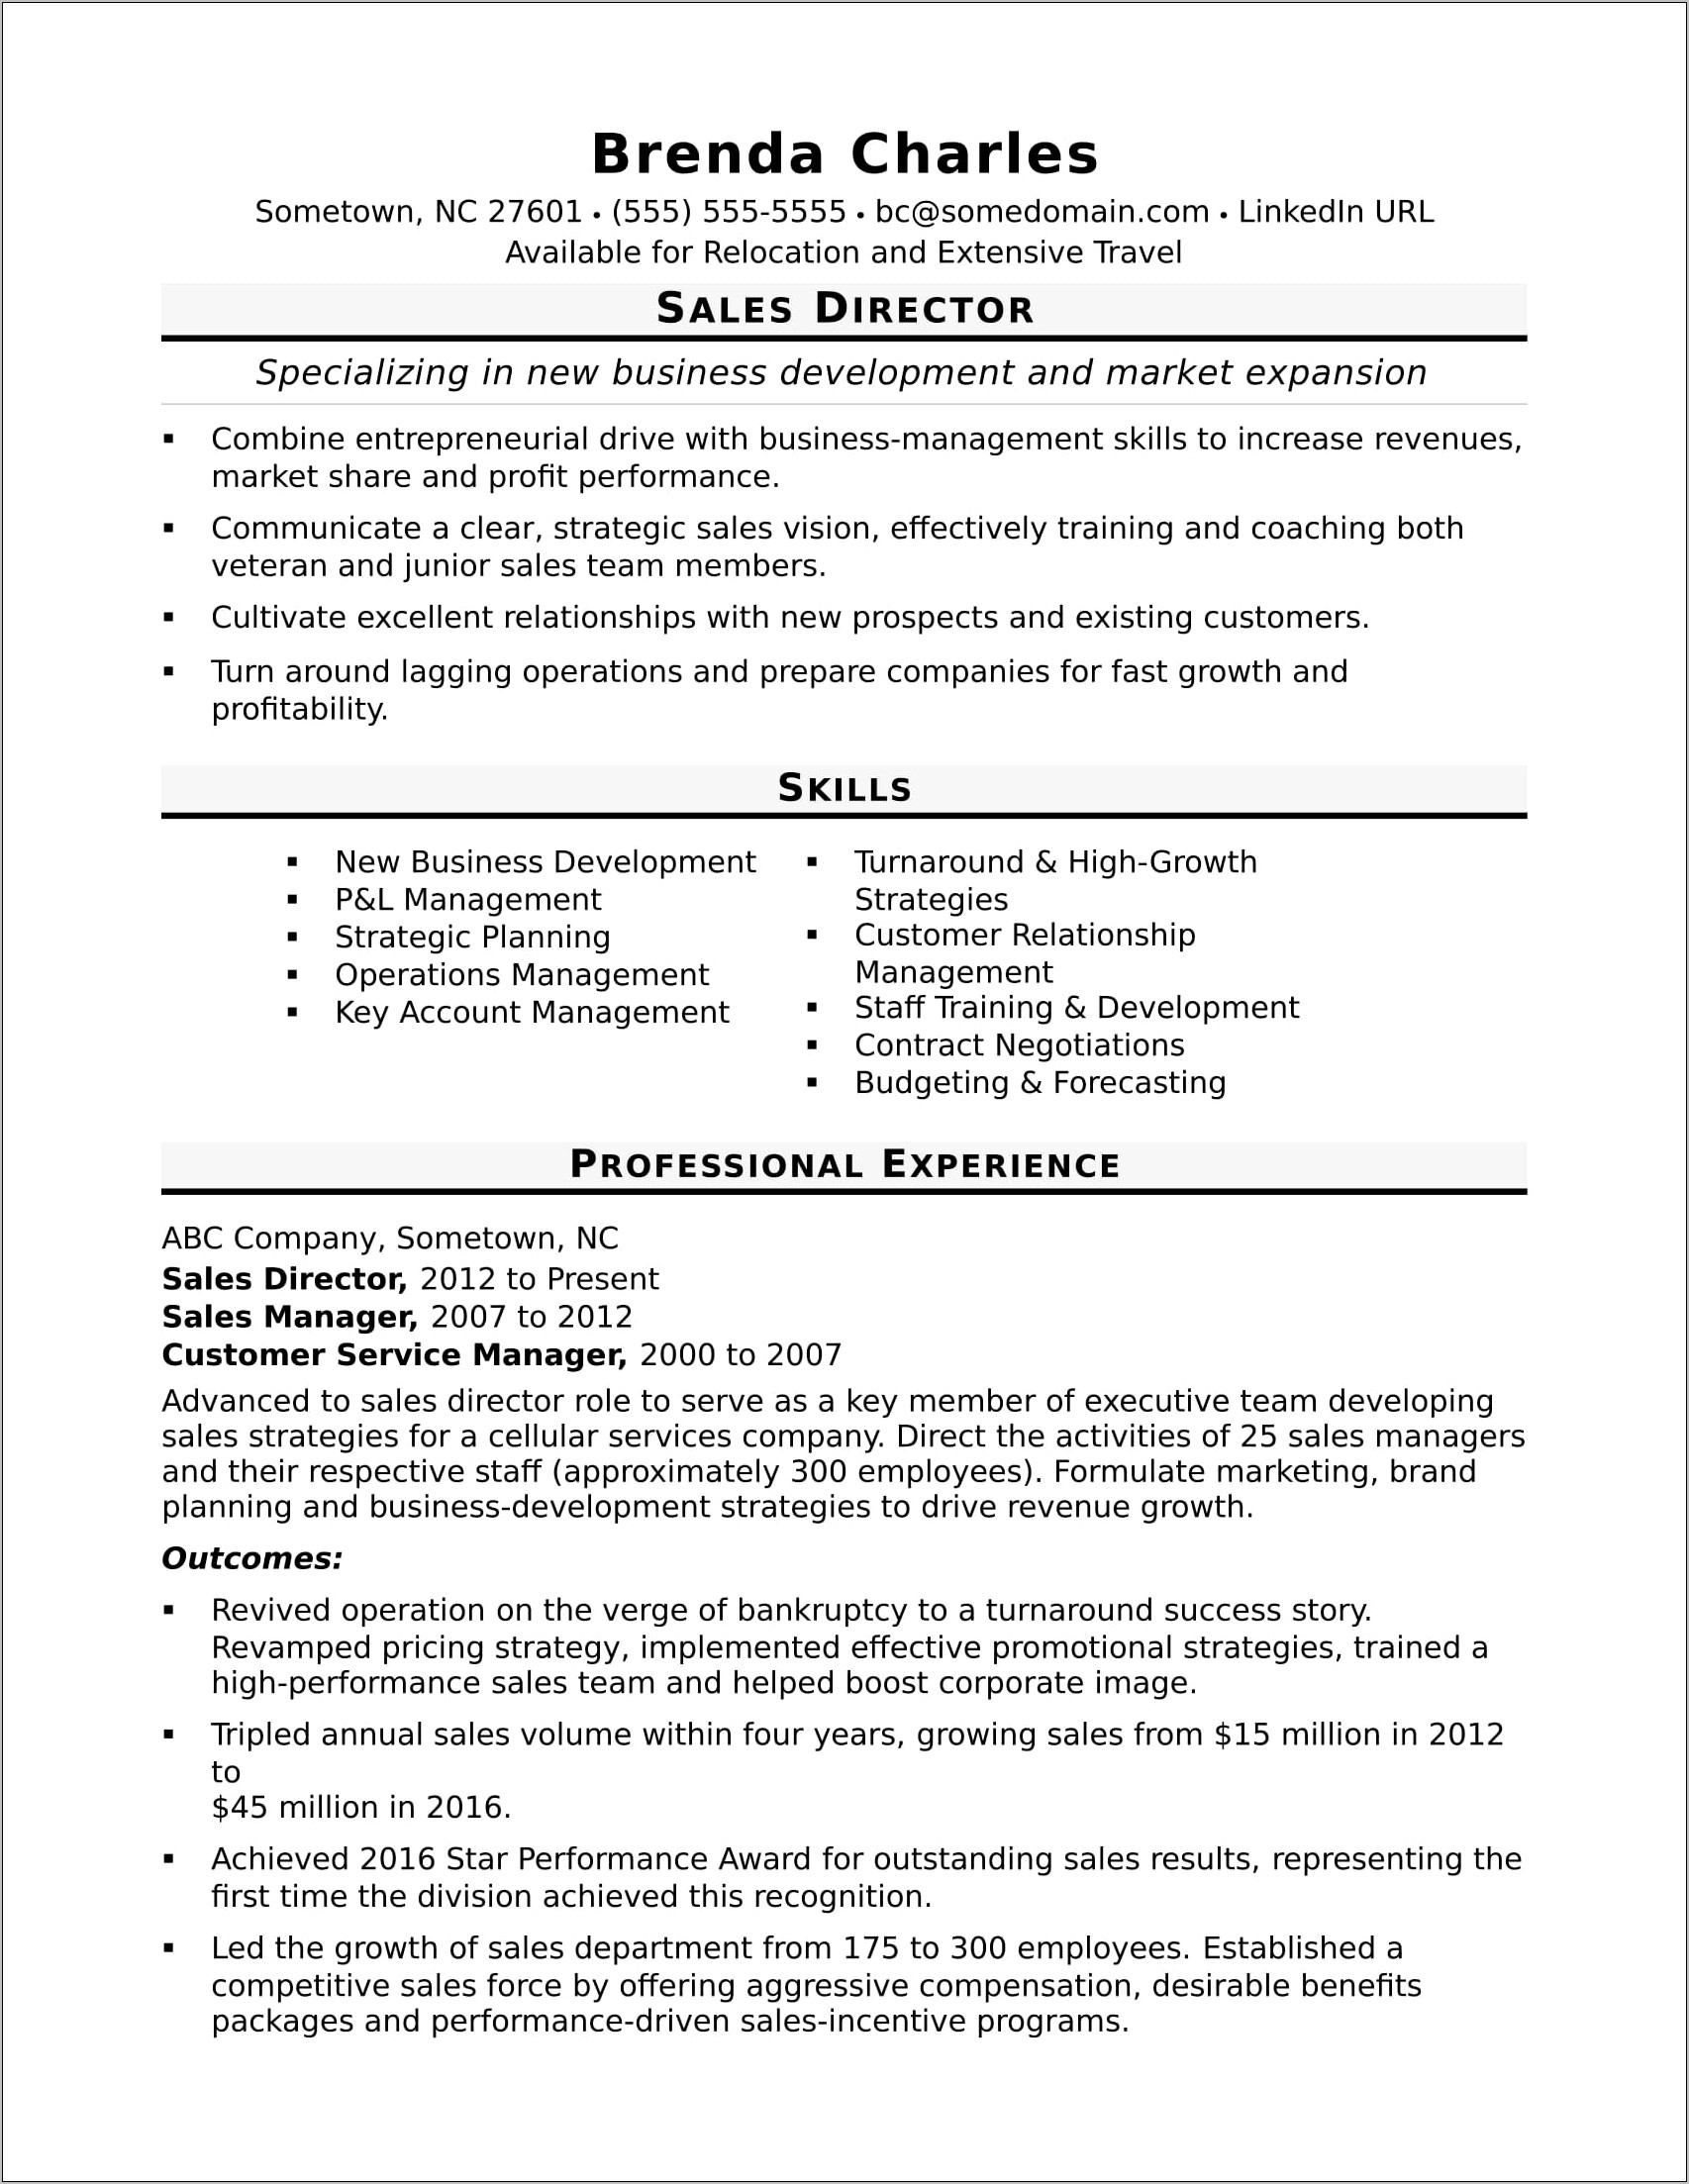 Professional Strenghts For Resume Samples